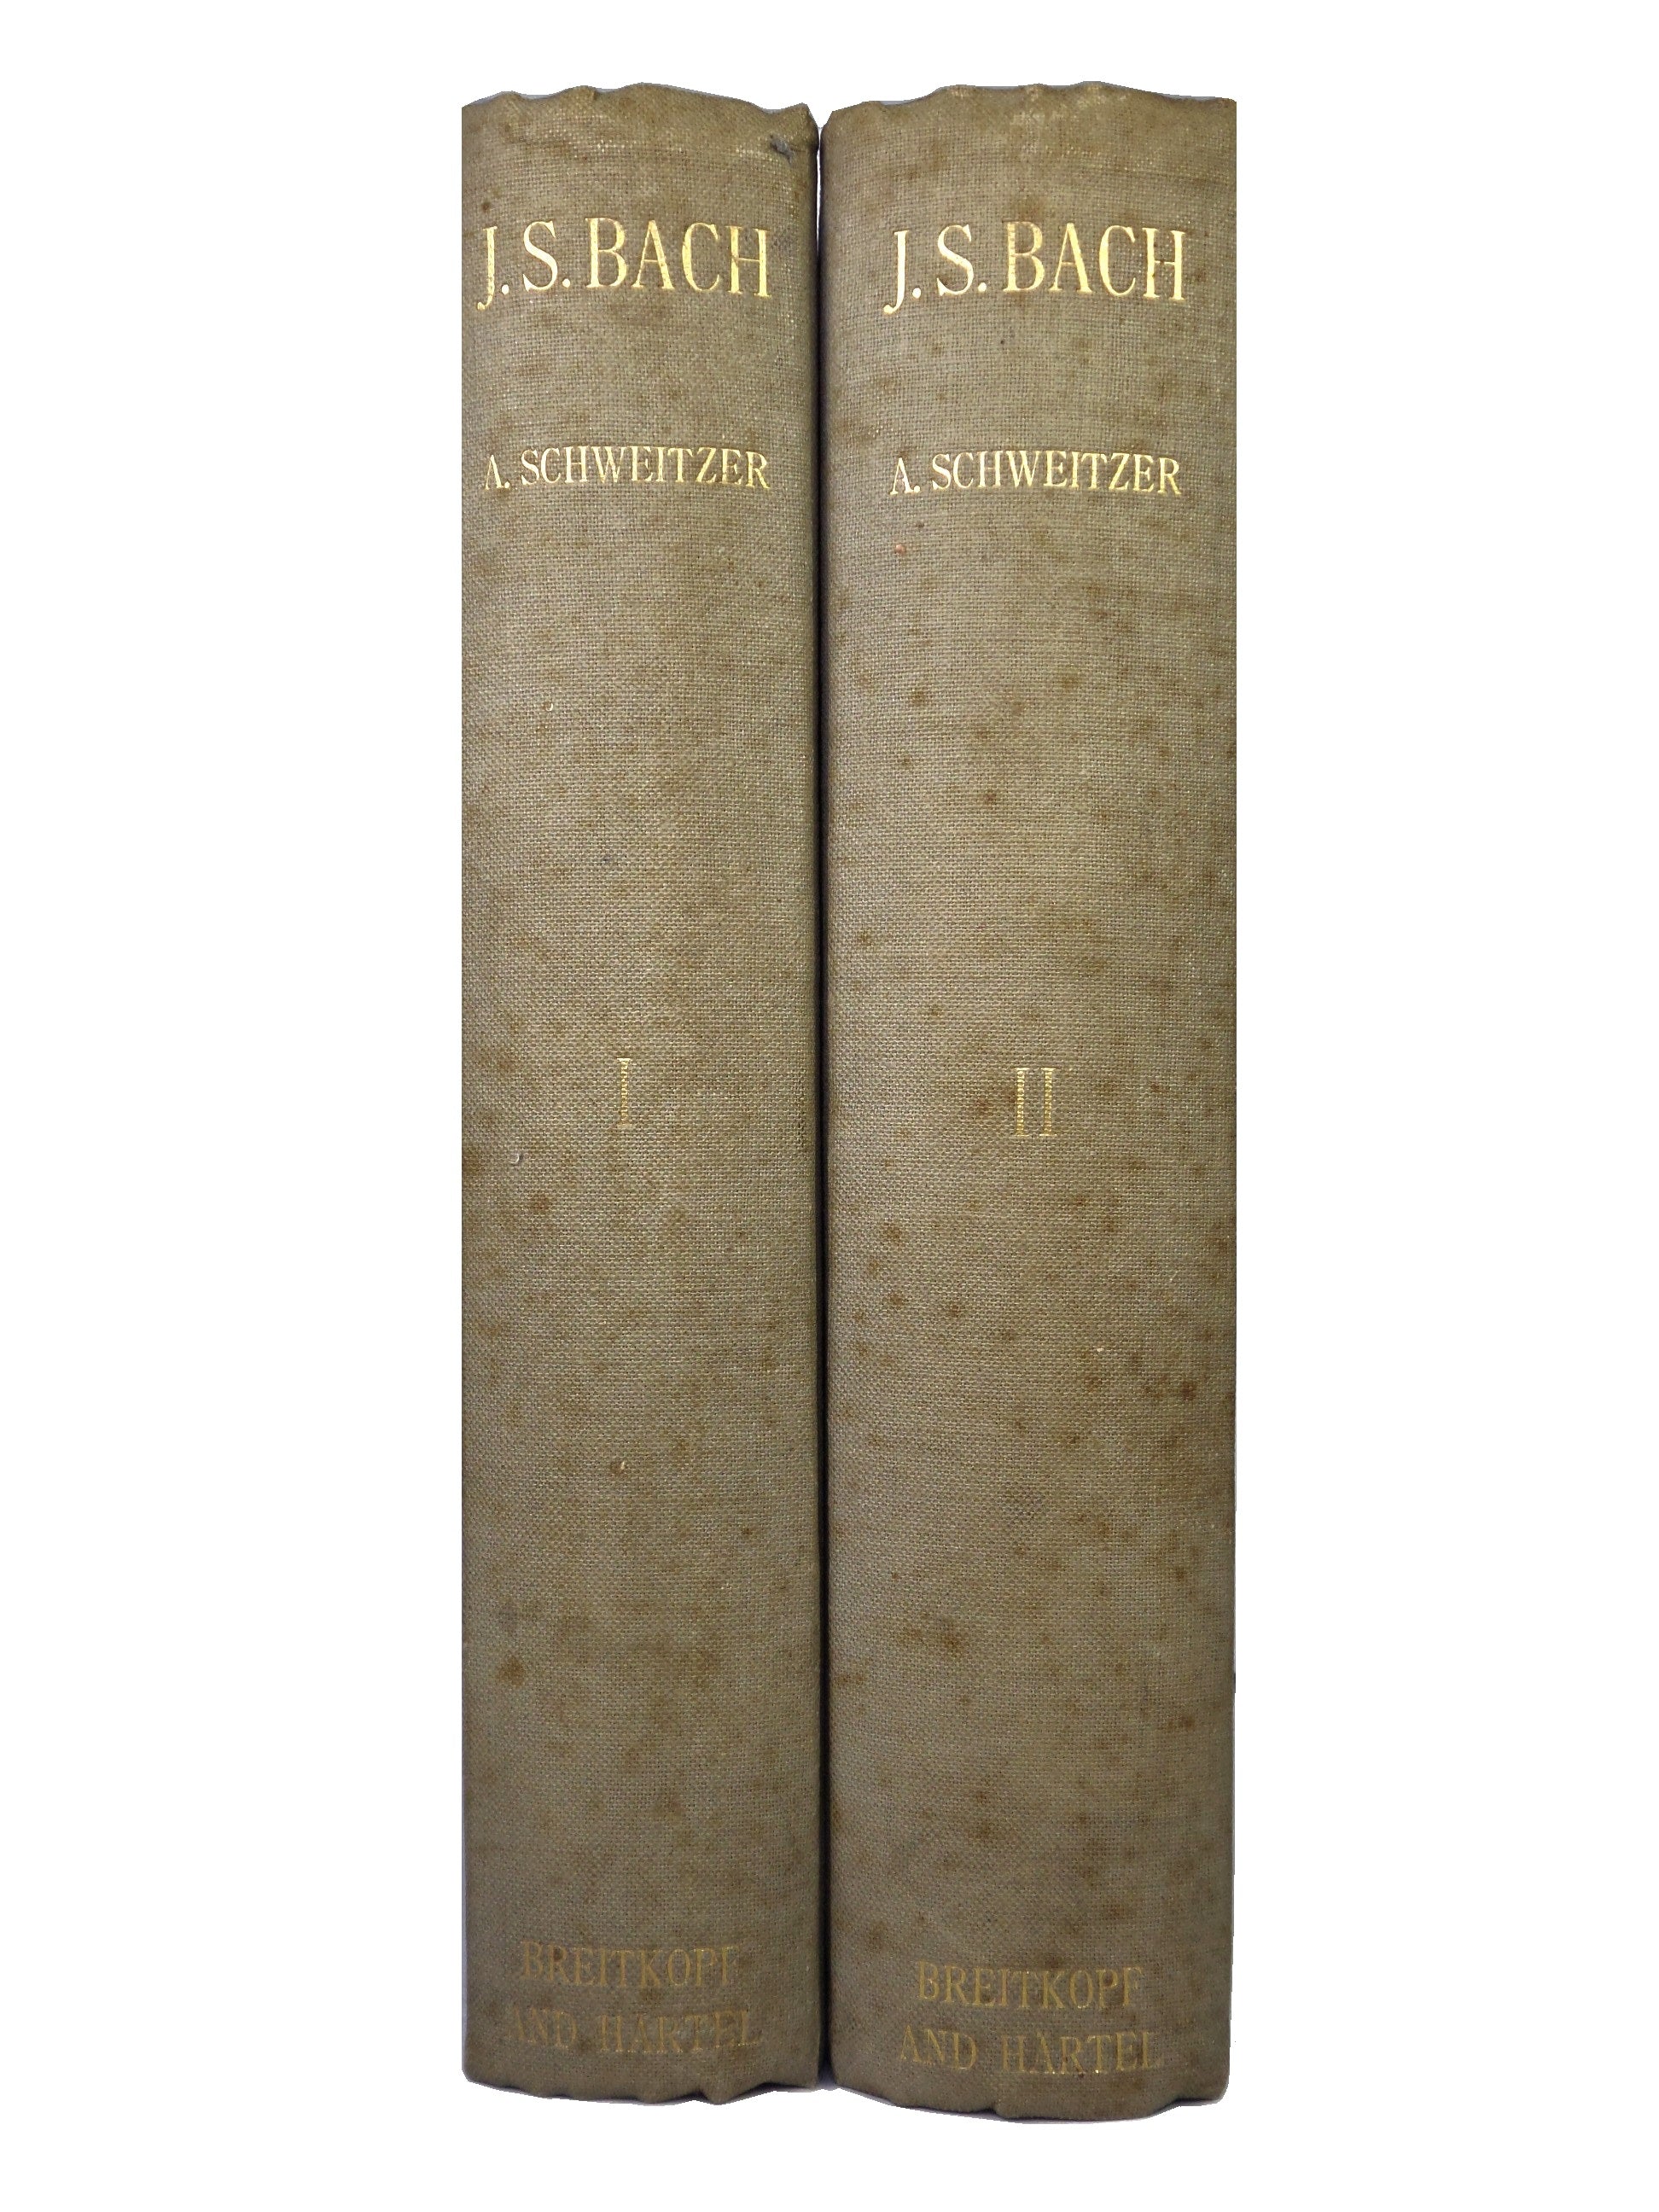 J.S. BACH BY ALBERT SCHWEITZER 1911 FIRST ENGLISH EDITION IN TWO VOLUMES